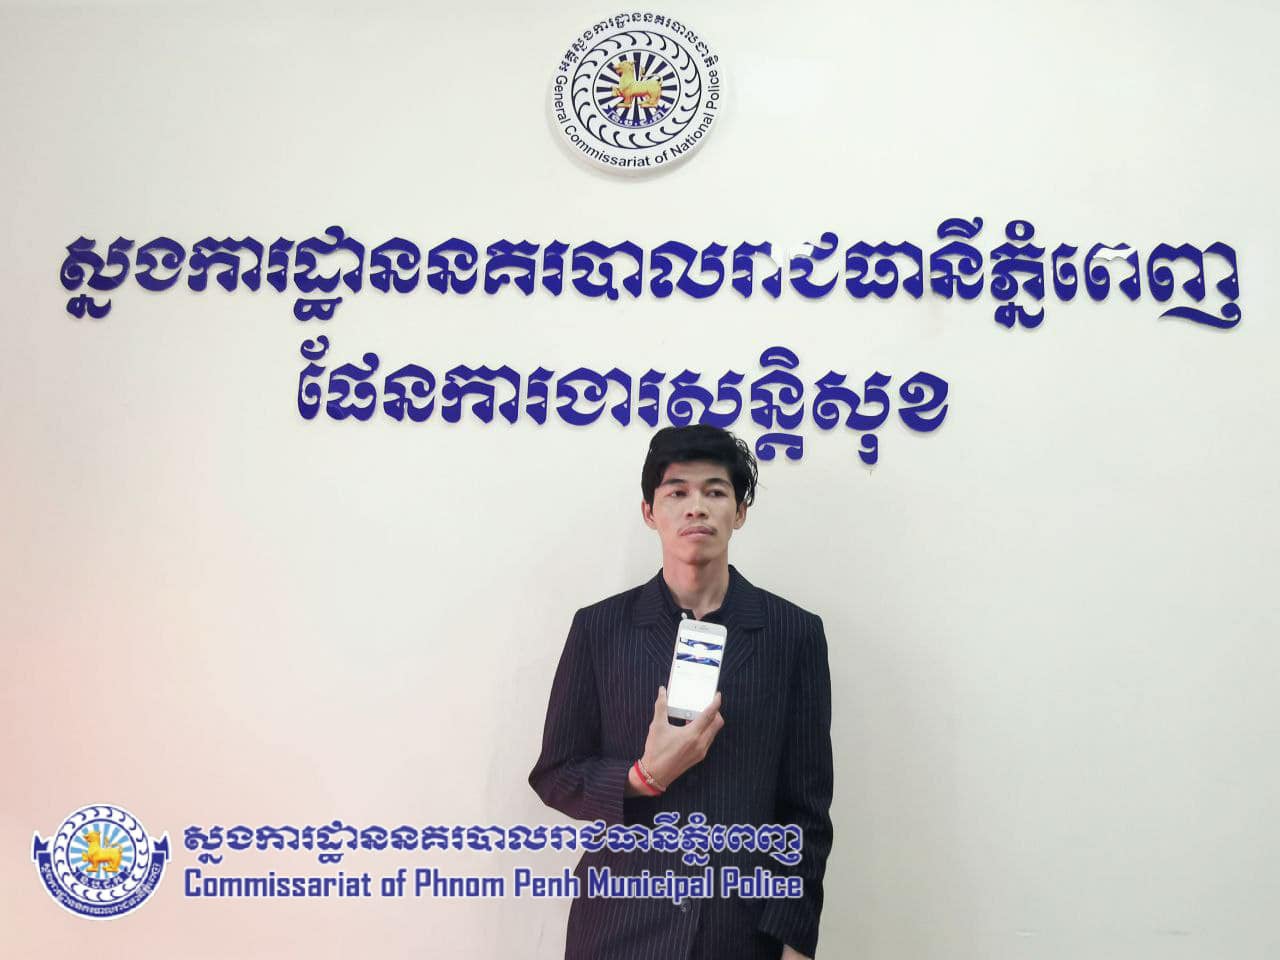 A screenshot of TVFB journalist, Sovann Rithy, at the General Commissariat of National Police in Phnom Penh, Cambodia on April 8, 2020. 